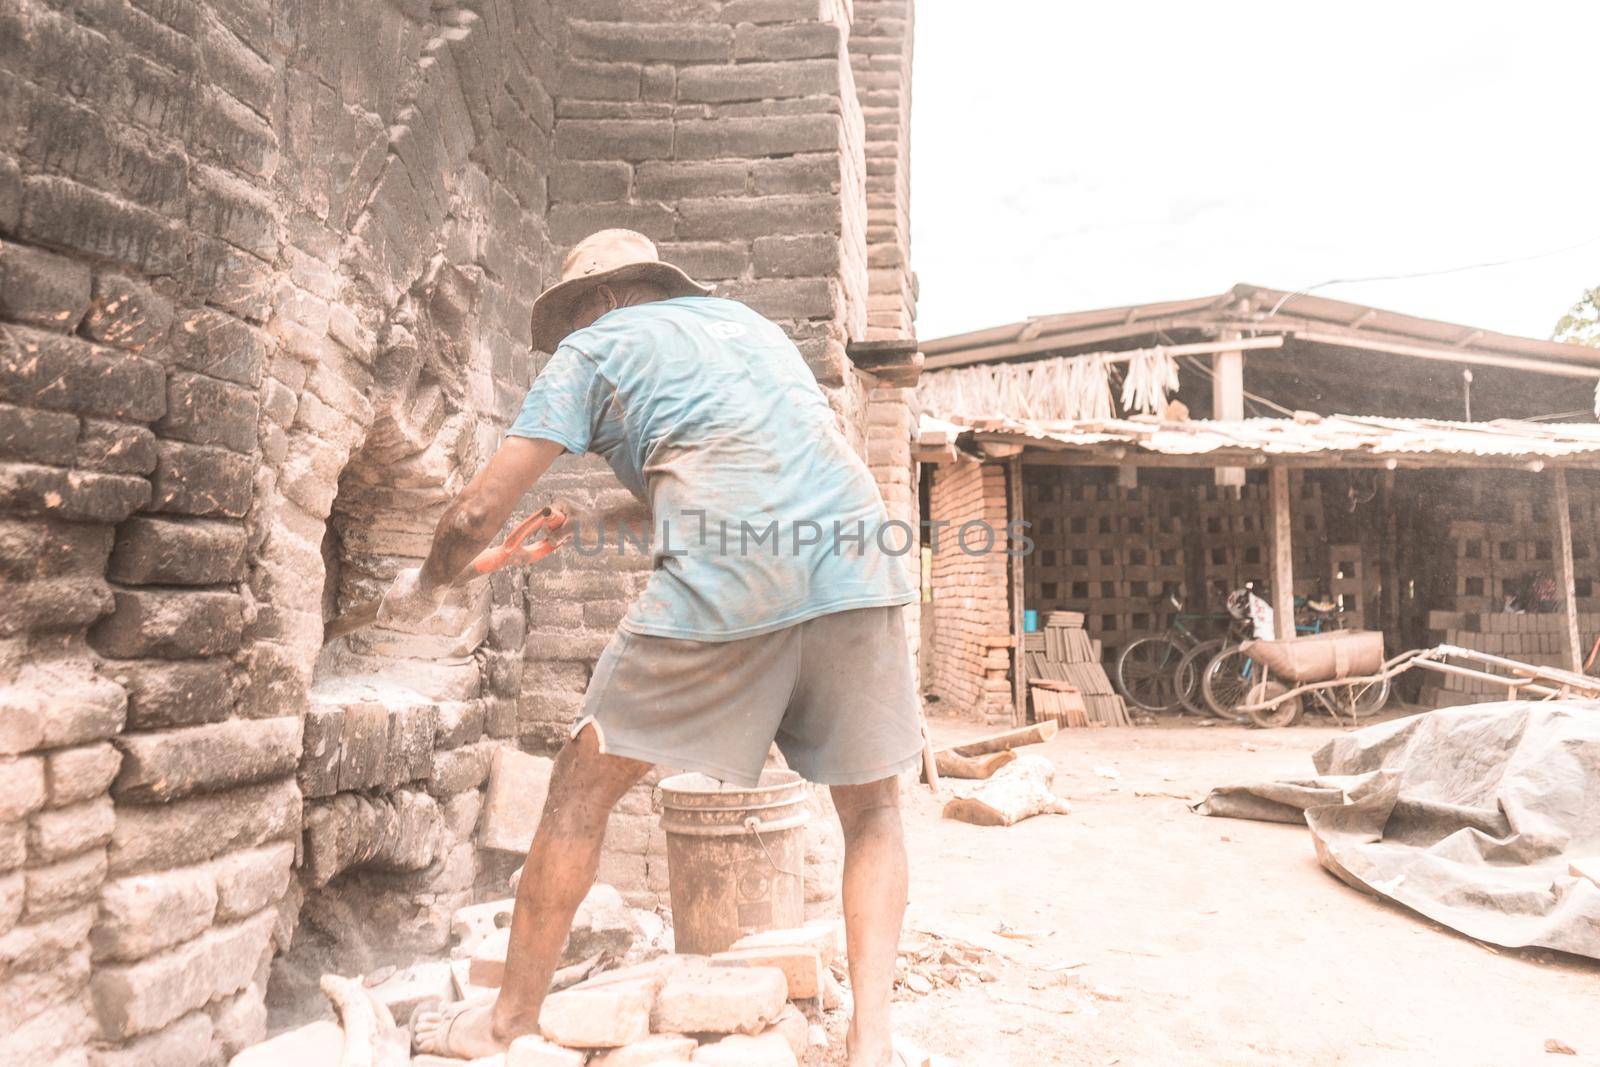 Worker seen from behind lighting a brick kiln to make clay blocks and tiles in La Paz Centro Nicaragua